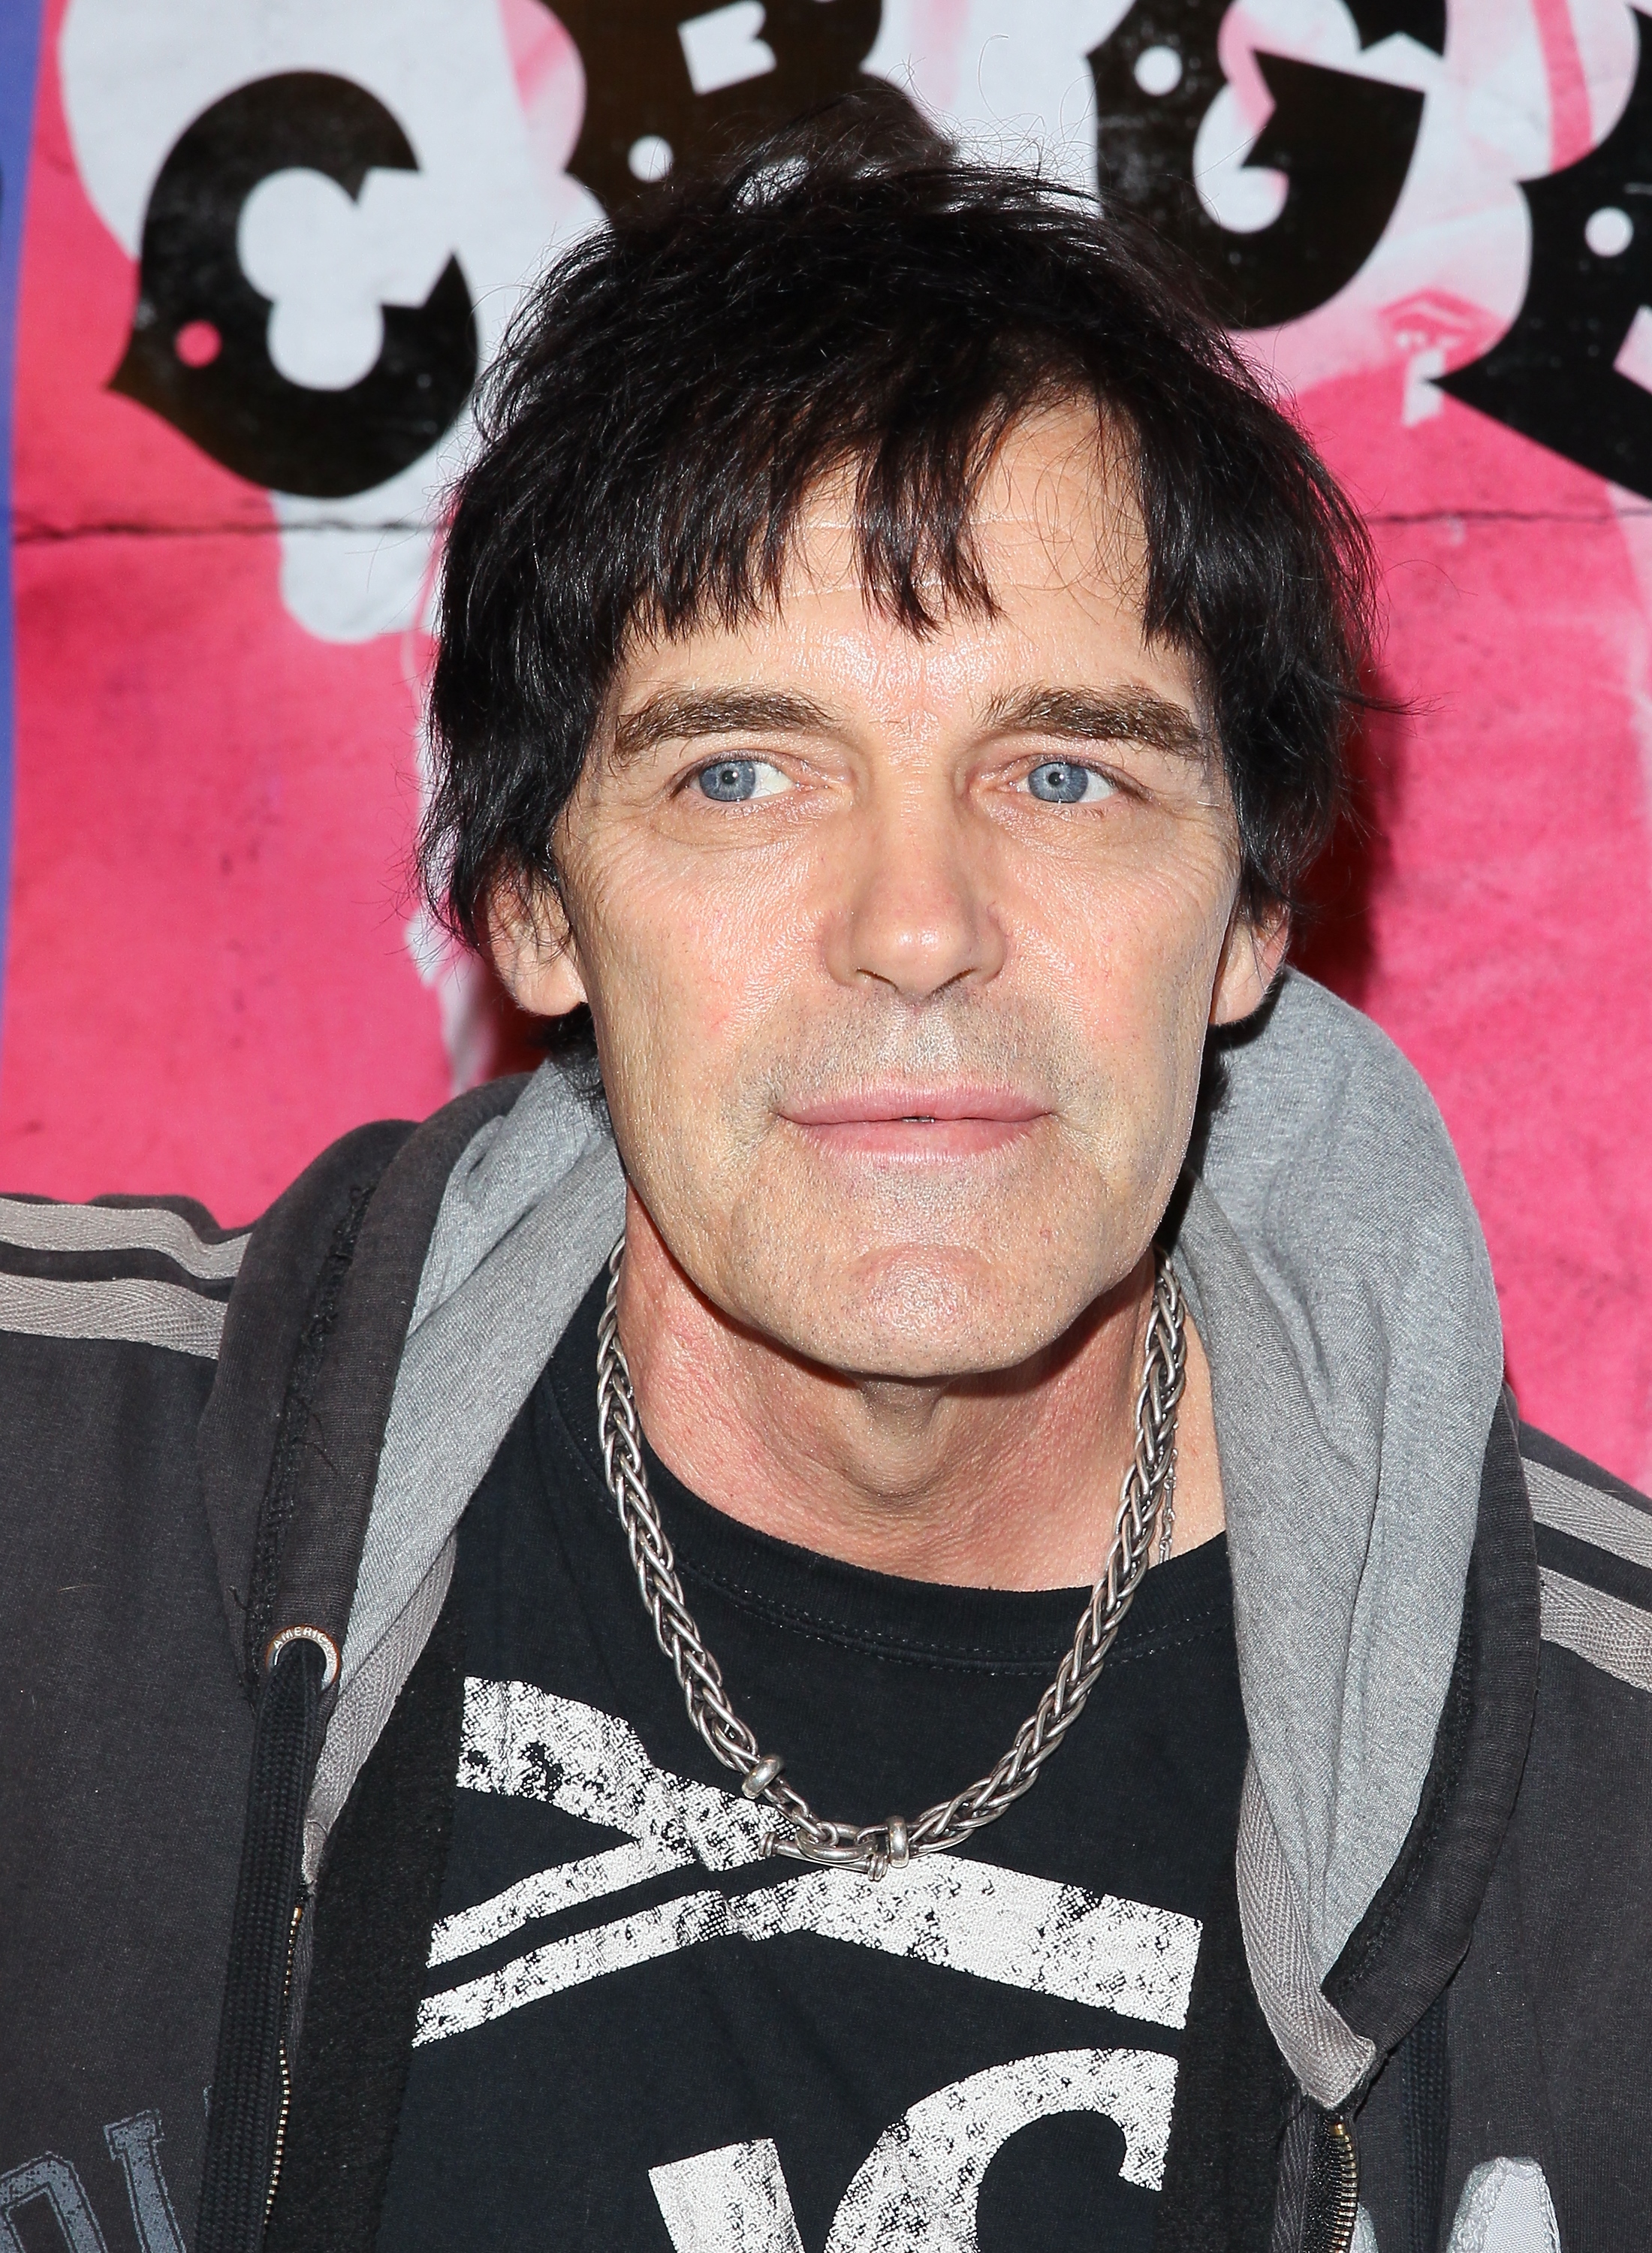 Richie Ramone attends the "CBGB" Los Angeles special screening at ArcLight Hollywood on October 1, 2013, in Hollywood, California. | Source: Getty Images